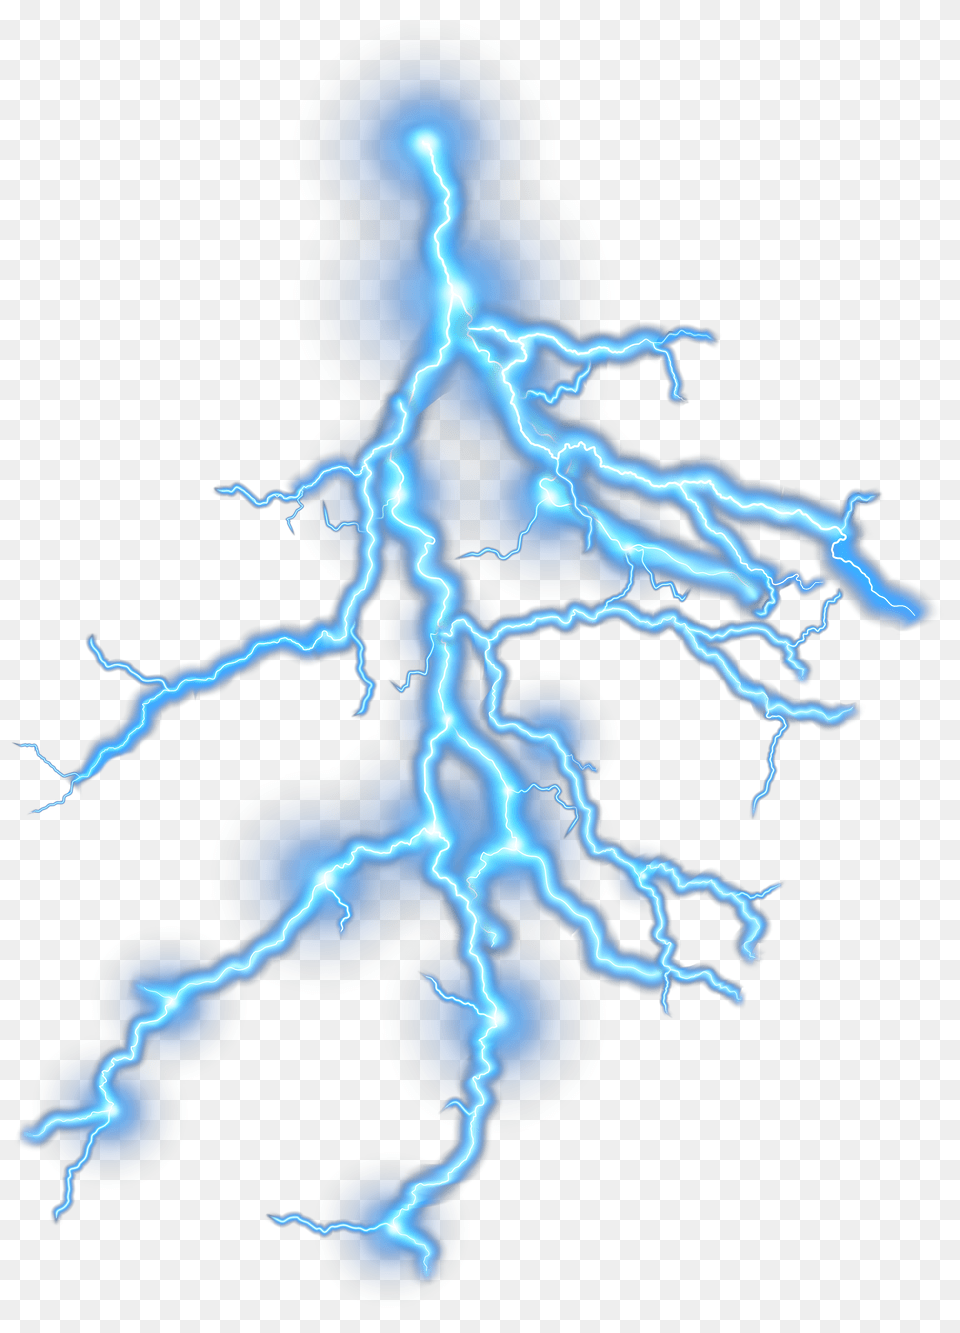 Popular And Trending Bluelightning Stickers Png Image